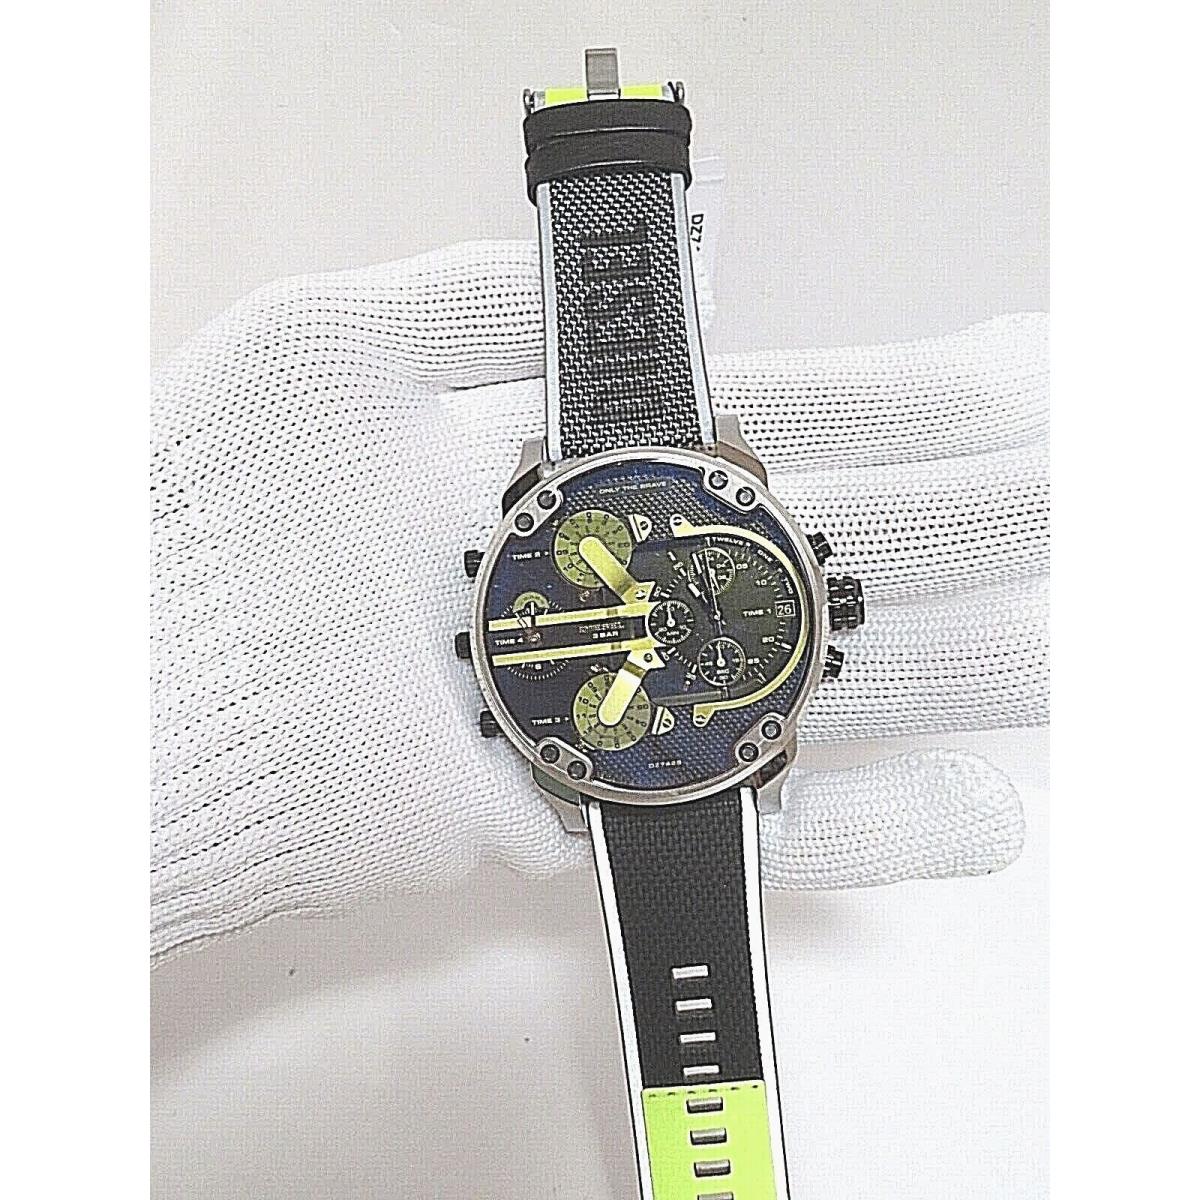 Diesel watch Daddy - Multi color crystal, iridescent blue and yellows Dial, has accent lime color on back, see photo Band, Black and stainless Bezel 4